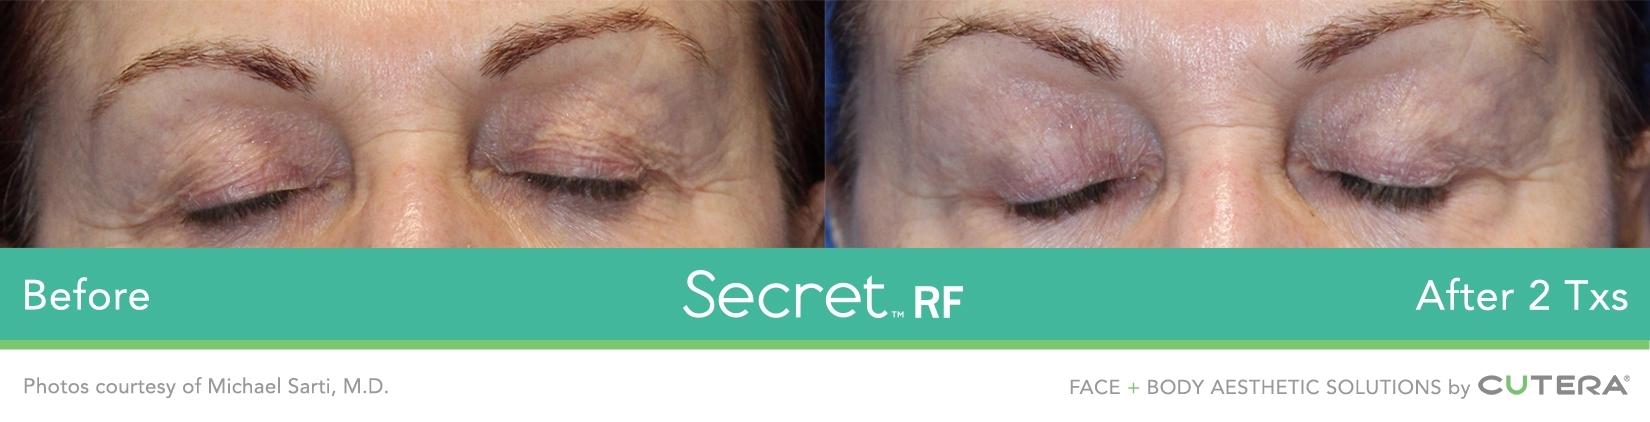 Secret RF: Patient 10 - Before and After  